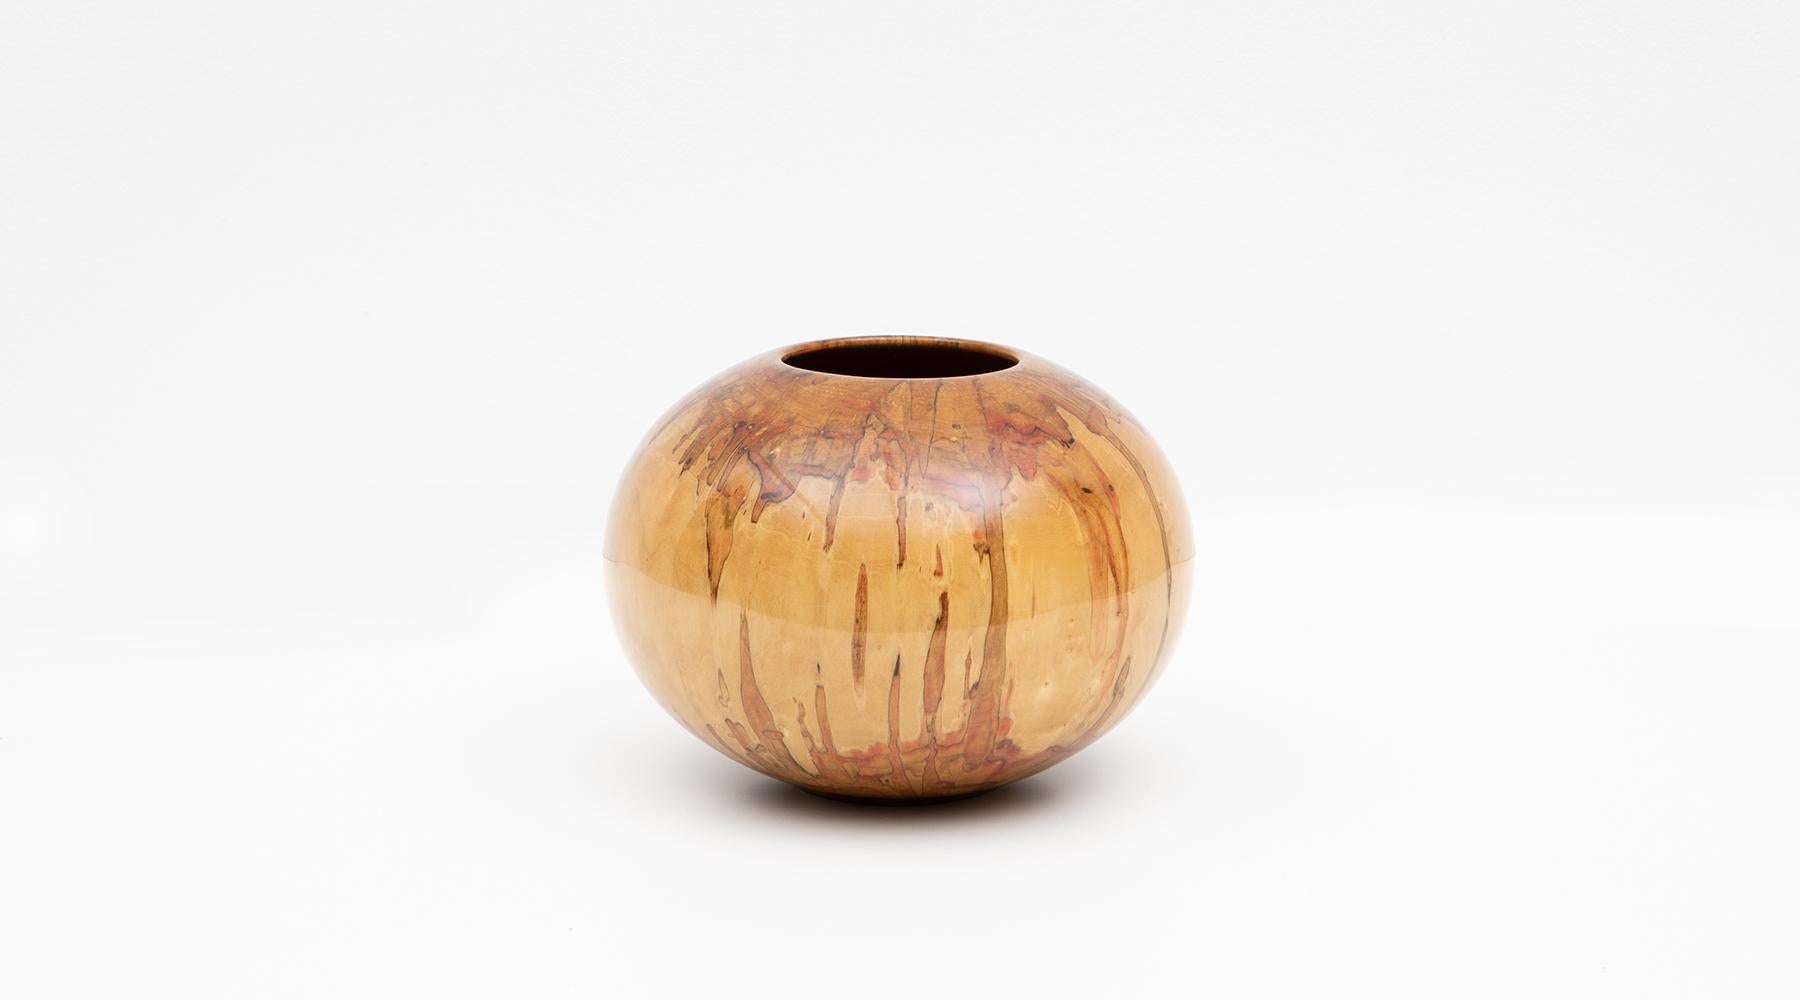 Vase in maplewood by Philip Moulthrop, 1978, USA.

Sublime Moulthrop bowl in well-preserved maplewood. The technique of wood turning, founded by the Moulthrop family and practised since three generations, is exemplified wonderfully in the pattern